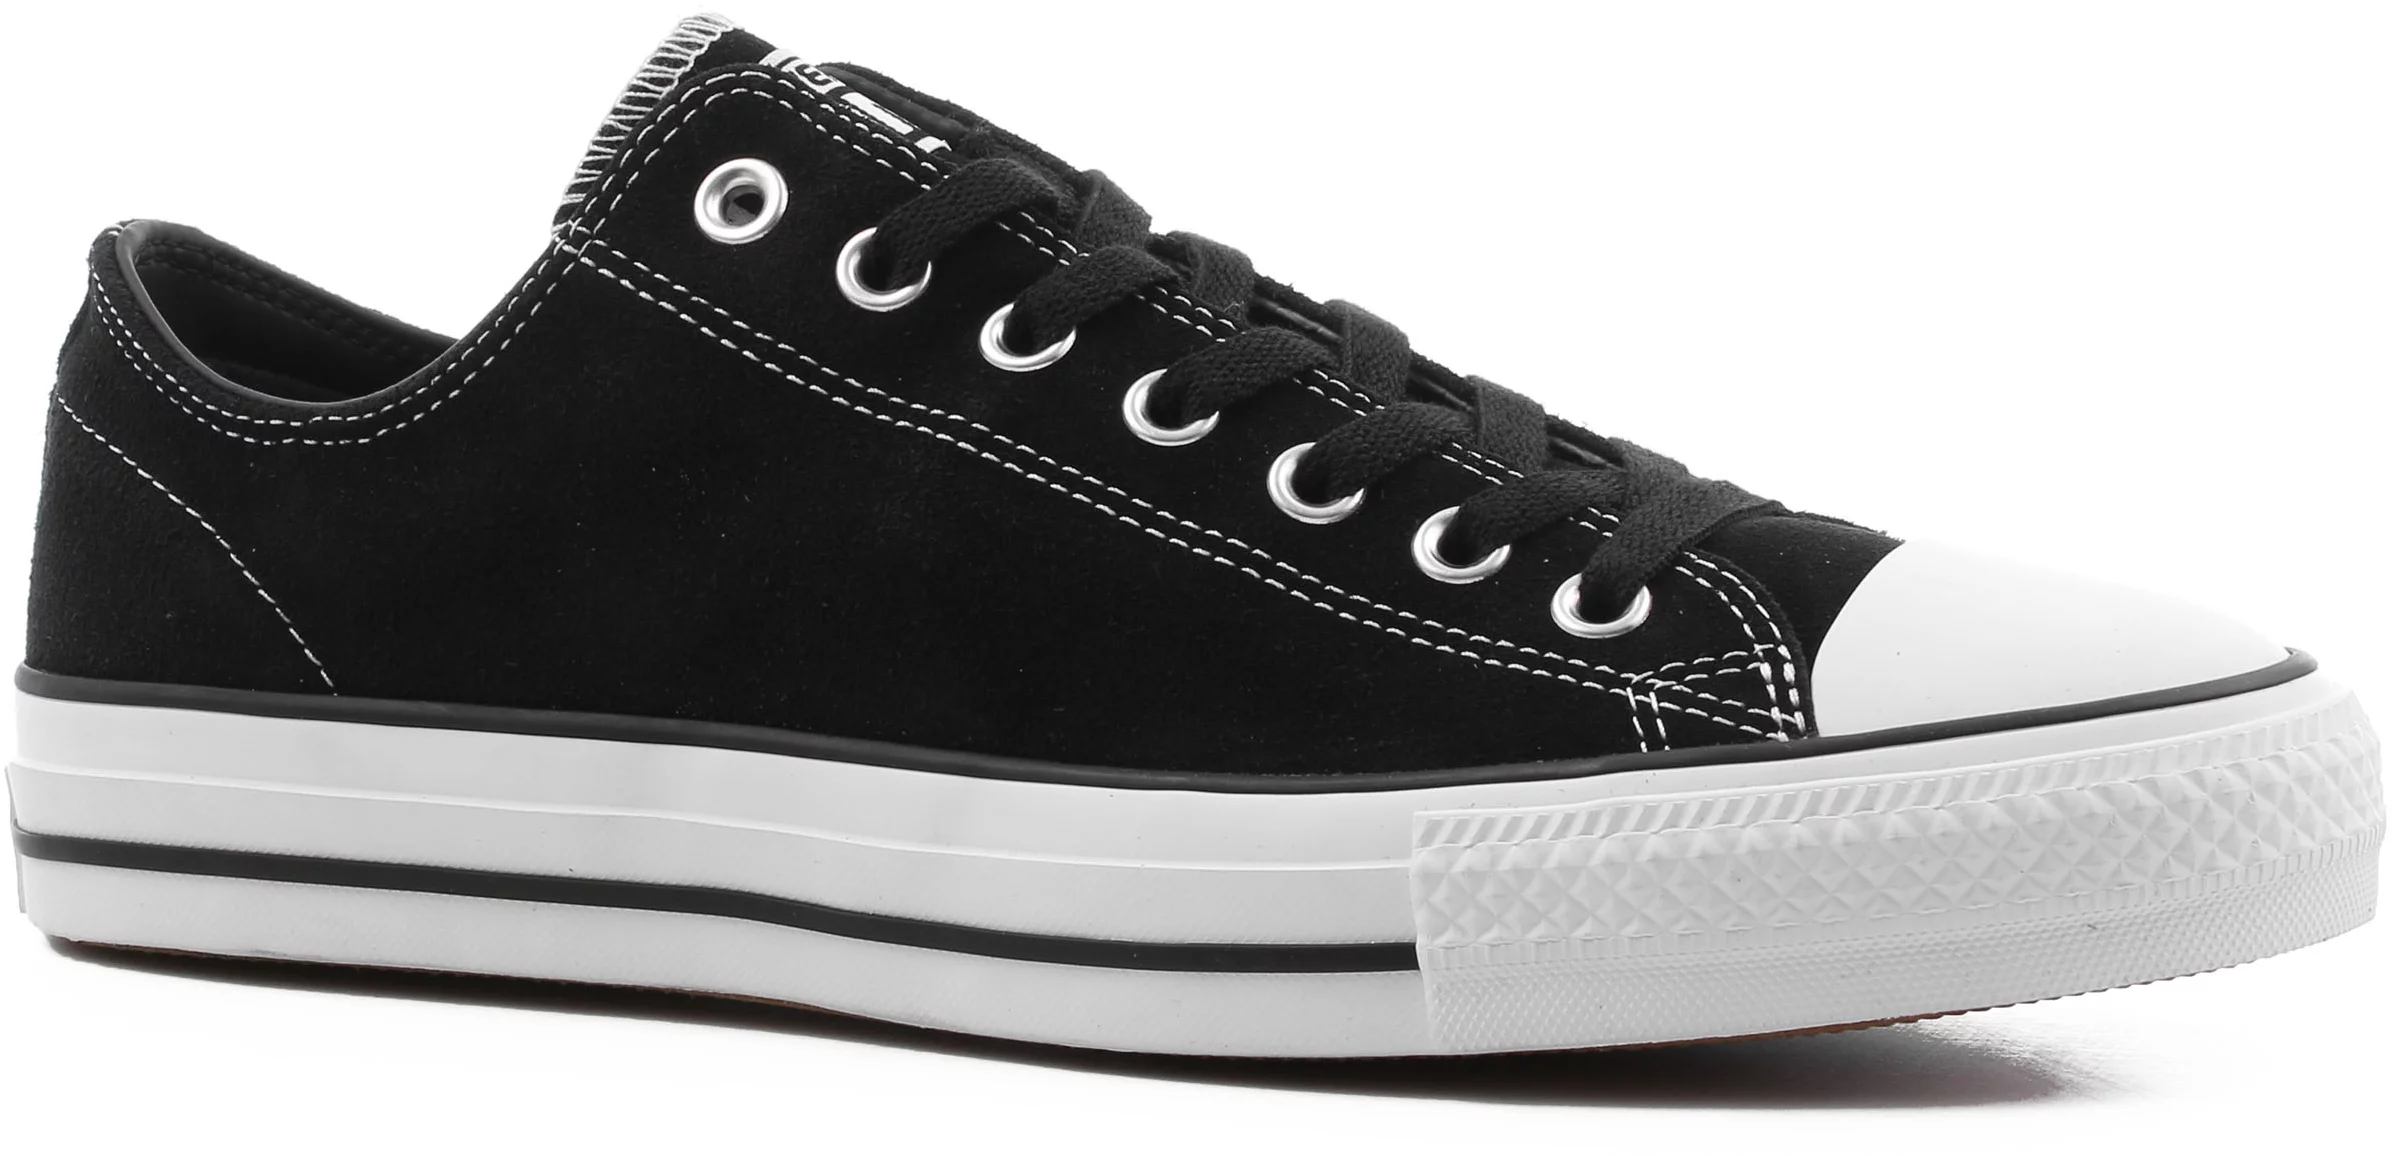 Converse Chuck Taylor All Pro Skate Shoes (suede) black/black/white - Free Shipping | Tactics